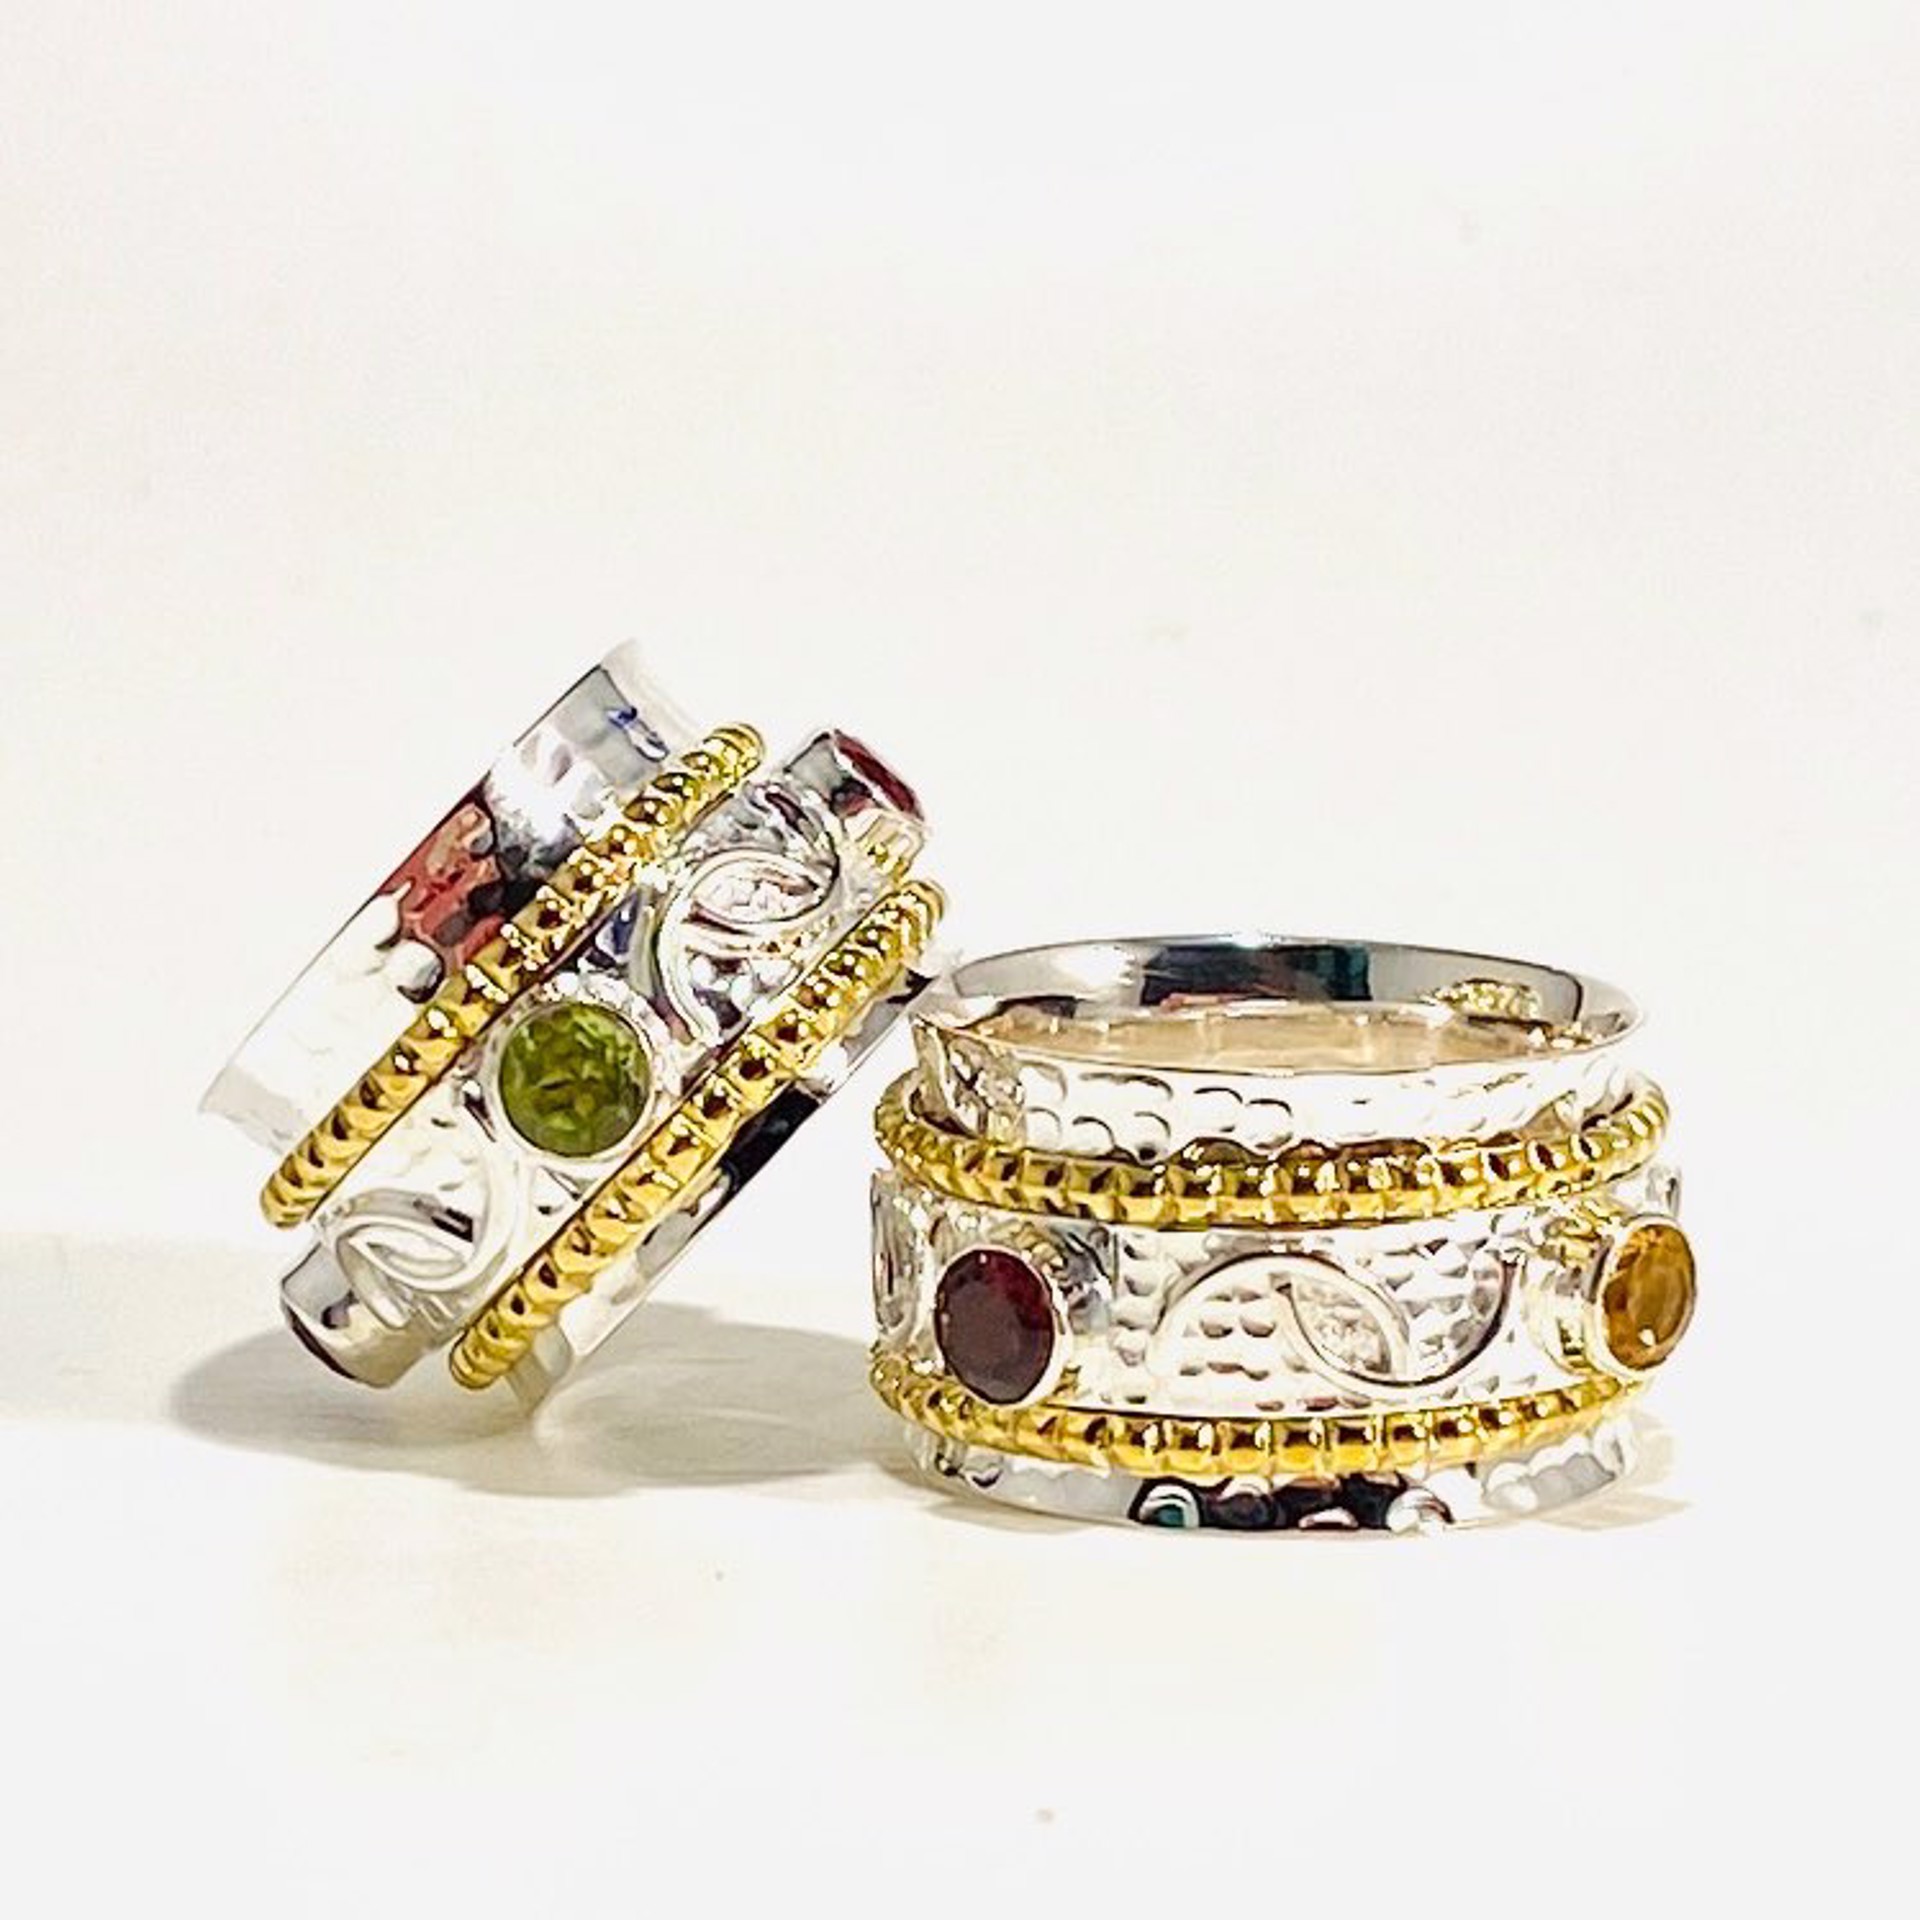 MON DR 772 Multi Gemstone Band Spin Ring LIMITED SIZES by Monica Mehta